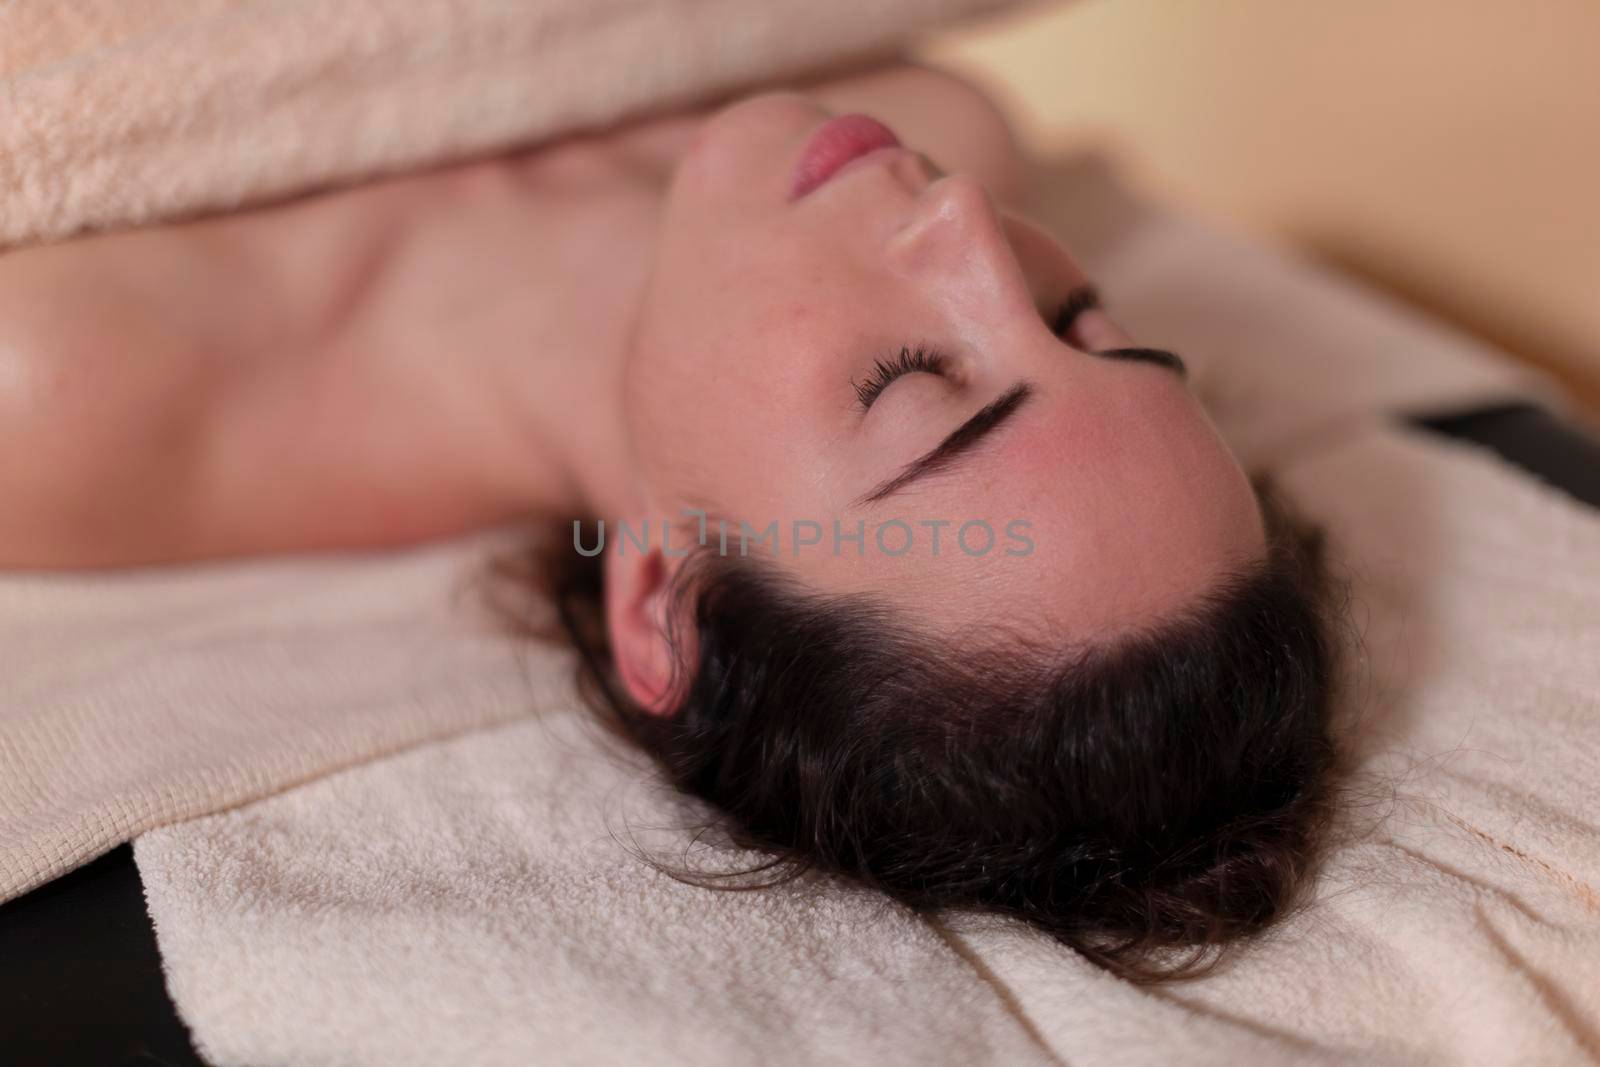 A patient lies relaxed on the massage table during a chiromassage session to achieve physical and mental wellness